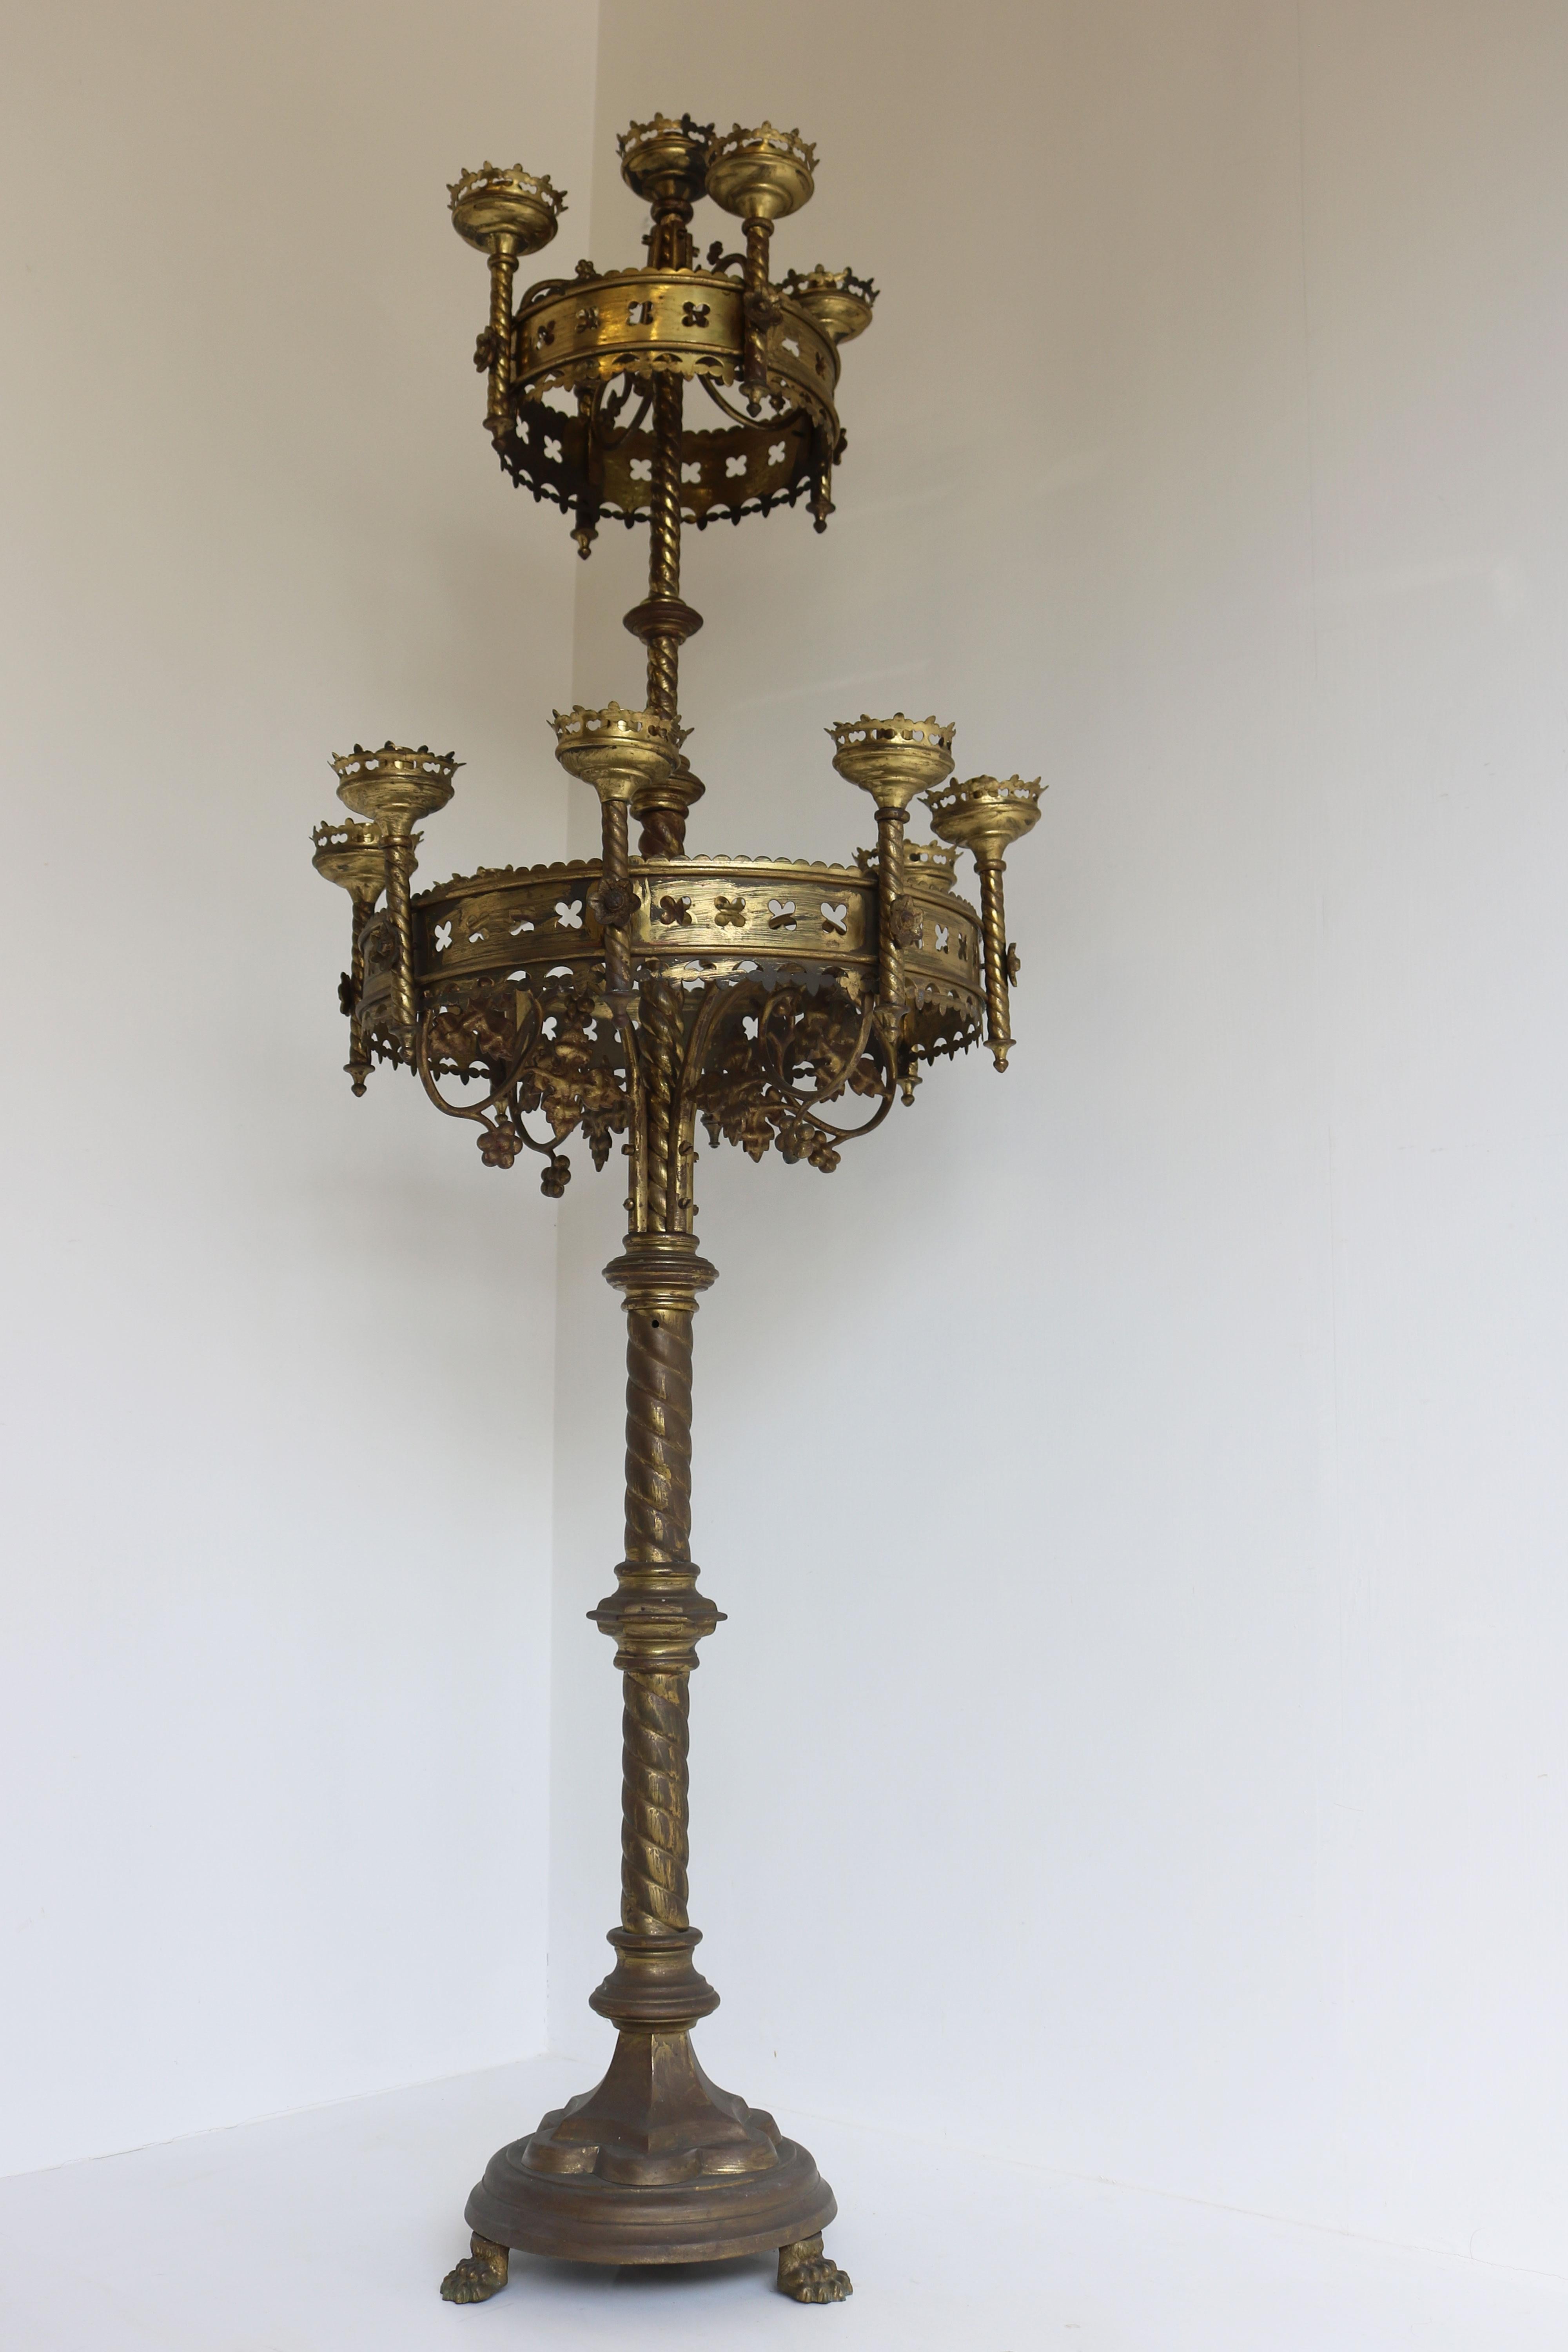 Large Antique Gothic Revival Church Candelabras 19th Century Brass Candlestick For Sale 4